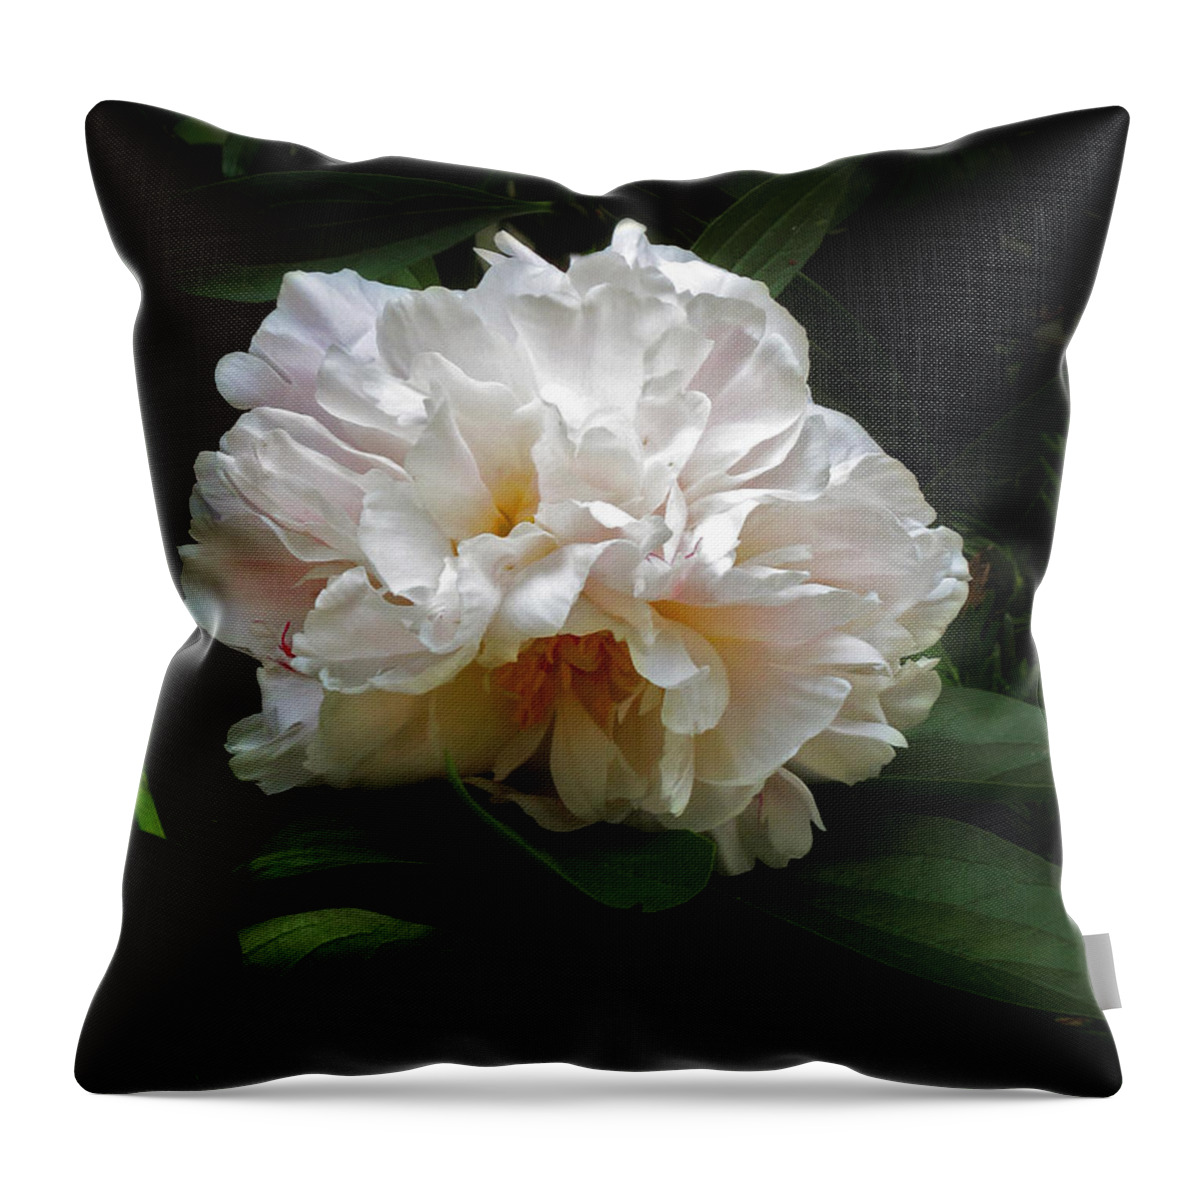 Flower Throw Pillow featuring the photograph Peony Petals #1 by Jessica Jenney